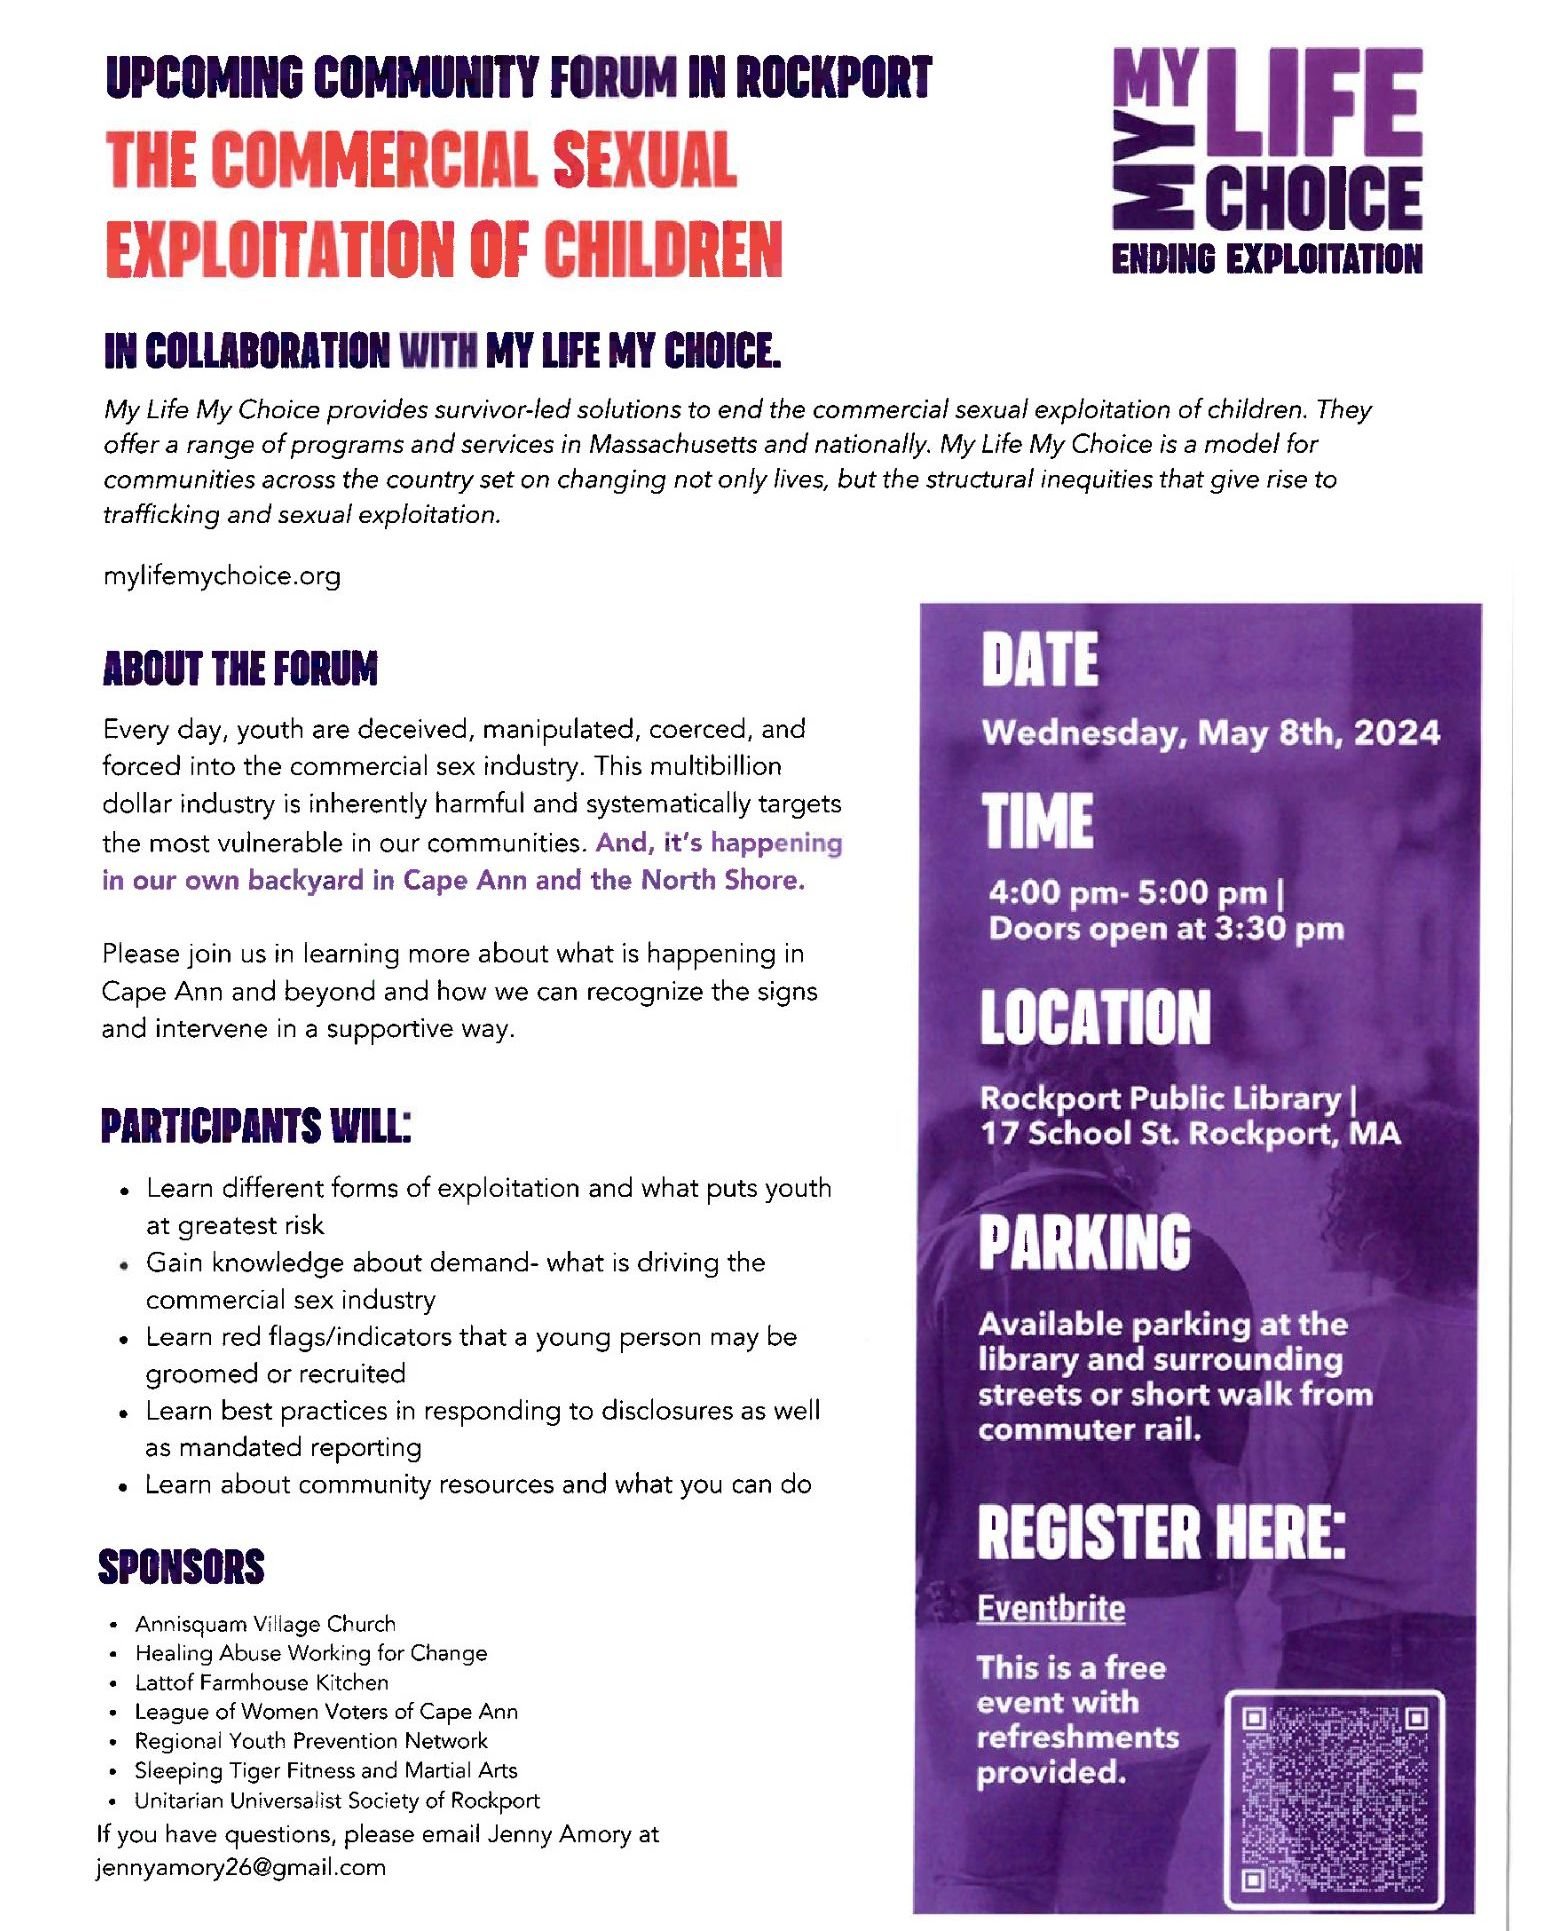 Register here: https://www.eventbrite.com/e/community-forum-in-rockport-the-commercial-sexual-exploitation-of-children-tickets-830369667027?aff=oddtdtcreator